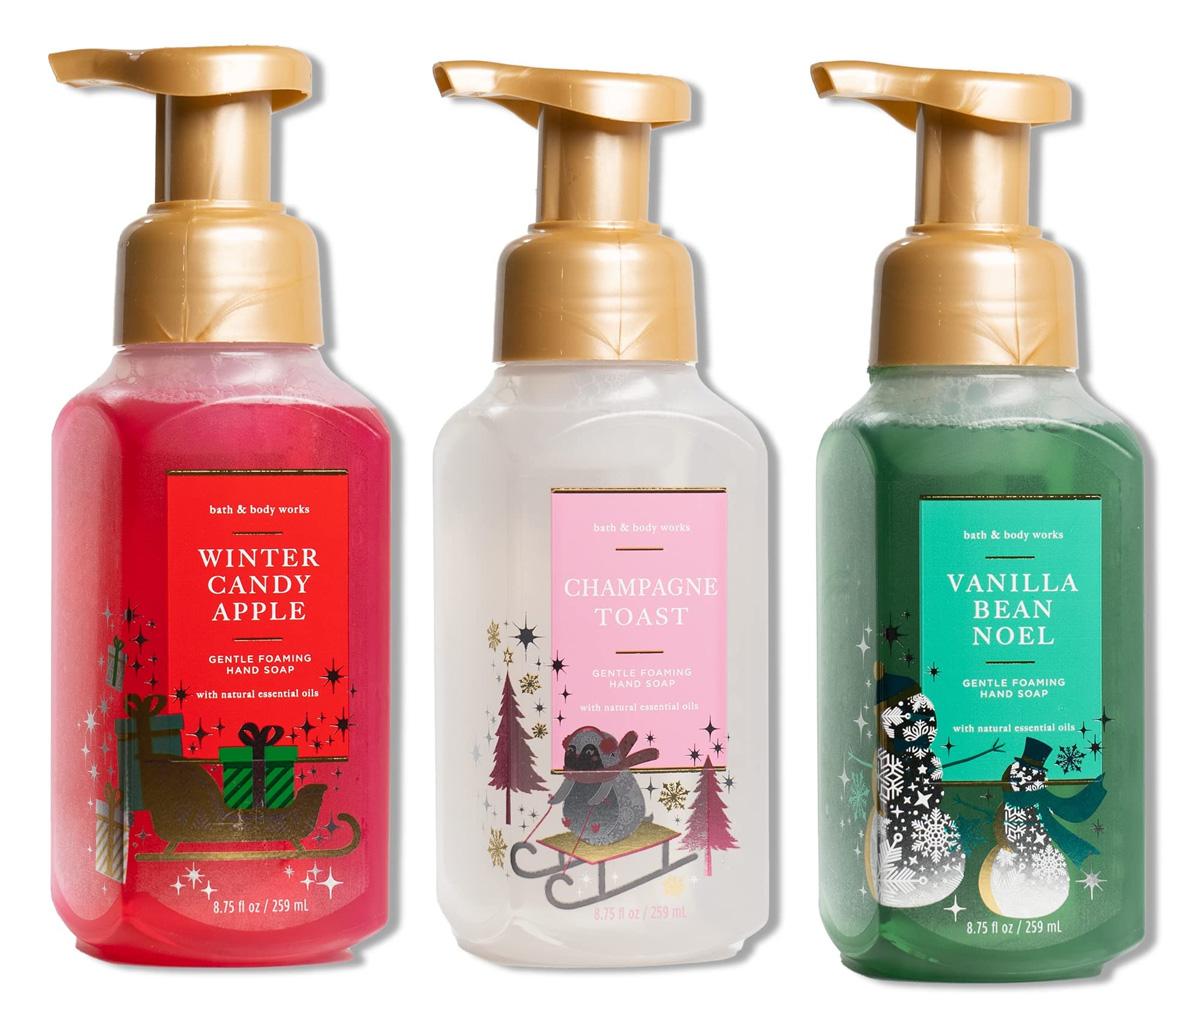 Bath and Body Works All Hand and Bar Soaps for $2.95